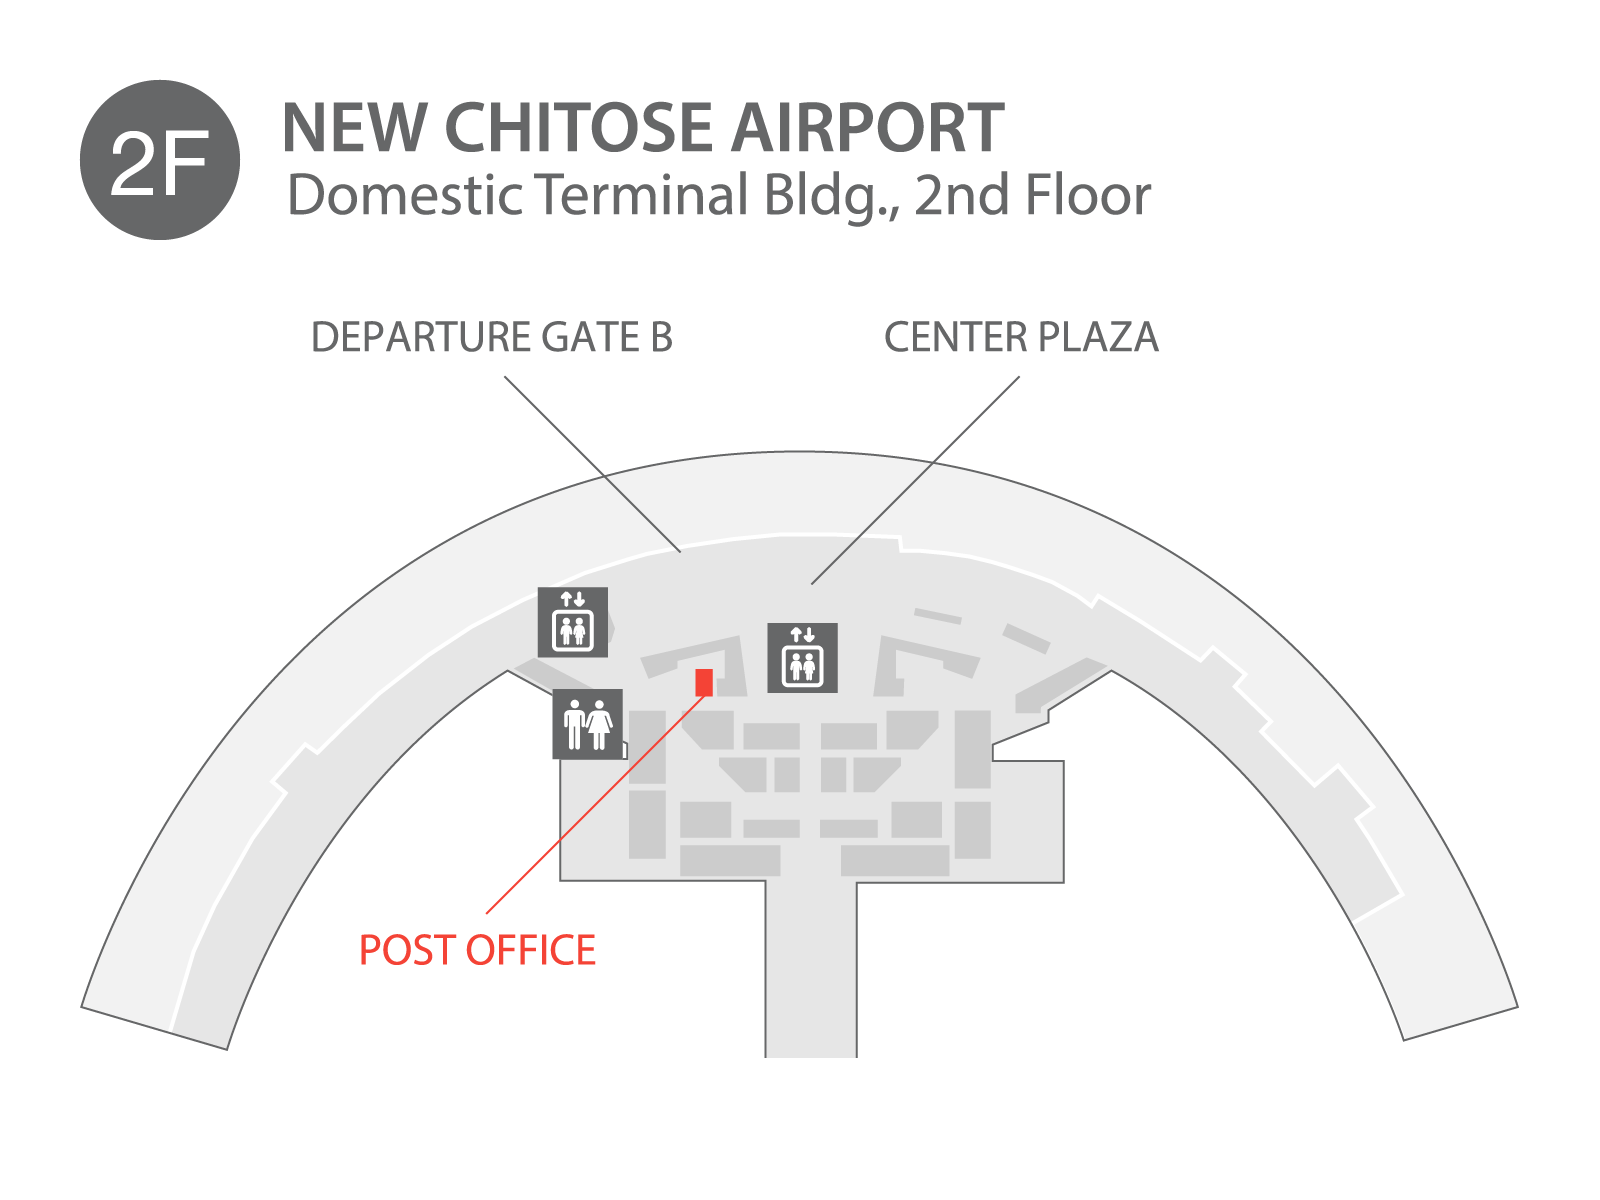 New Chitose Airport - New Chitose airport Domestic Terminal located on 2nd floor.